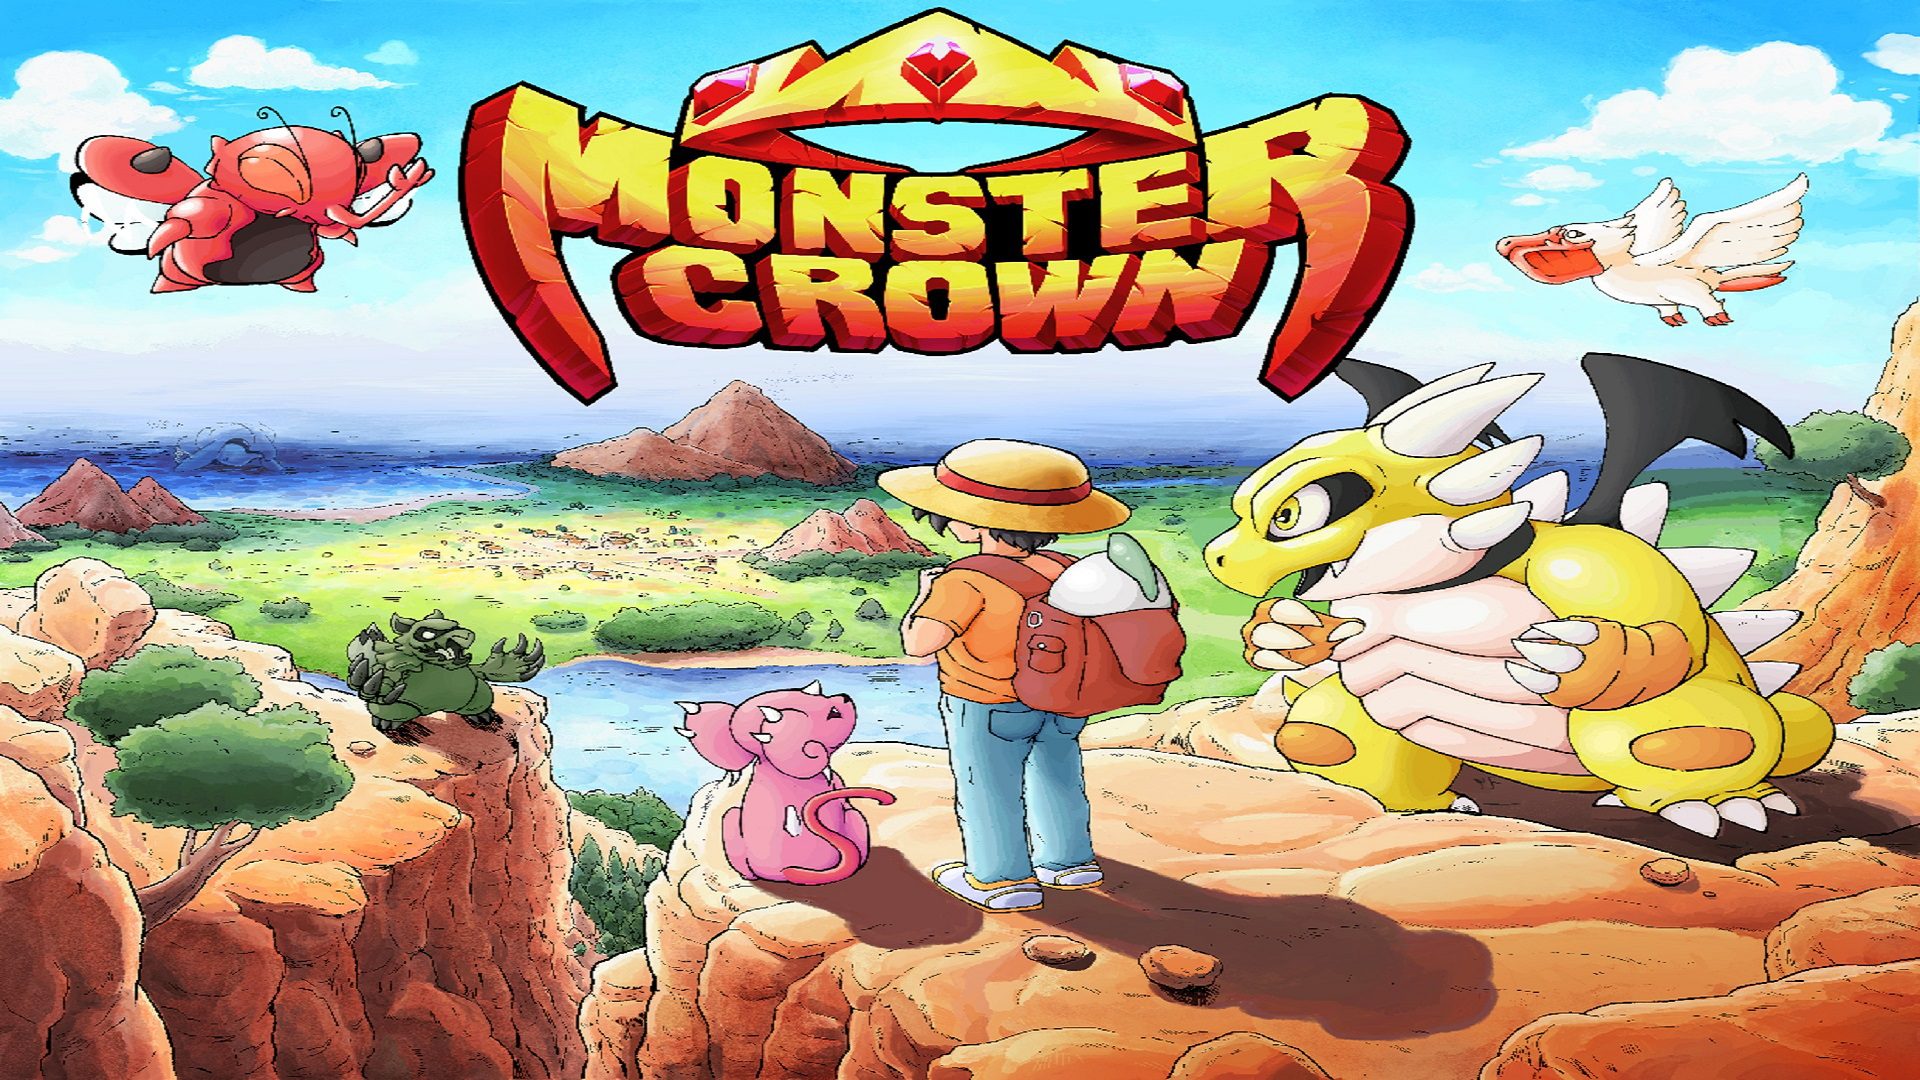 Pokémon Inspired RPG Monster Crown PS4 Release Date is October 12th